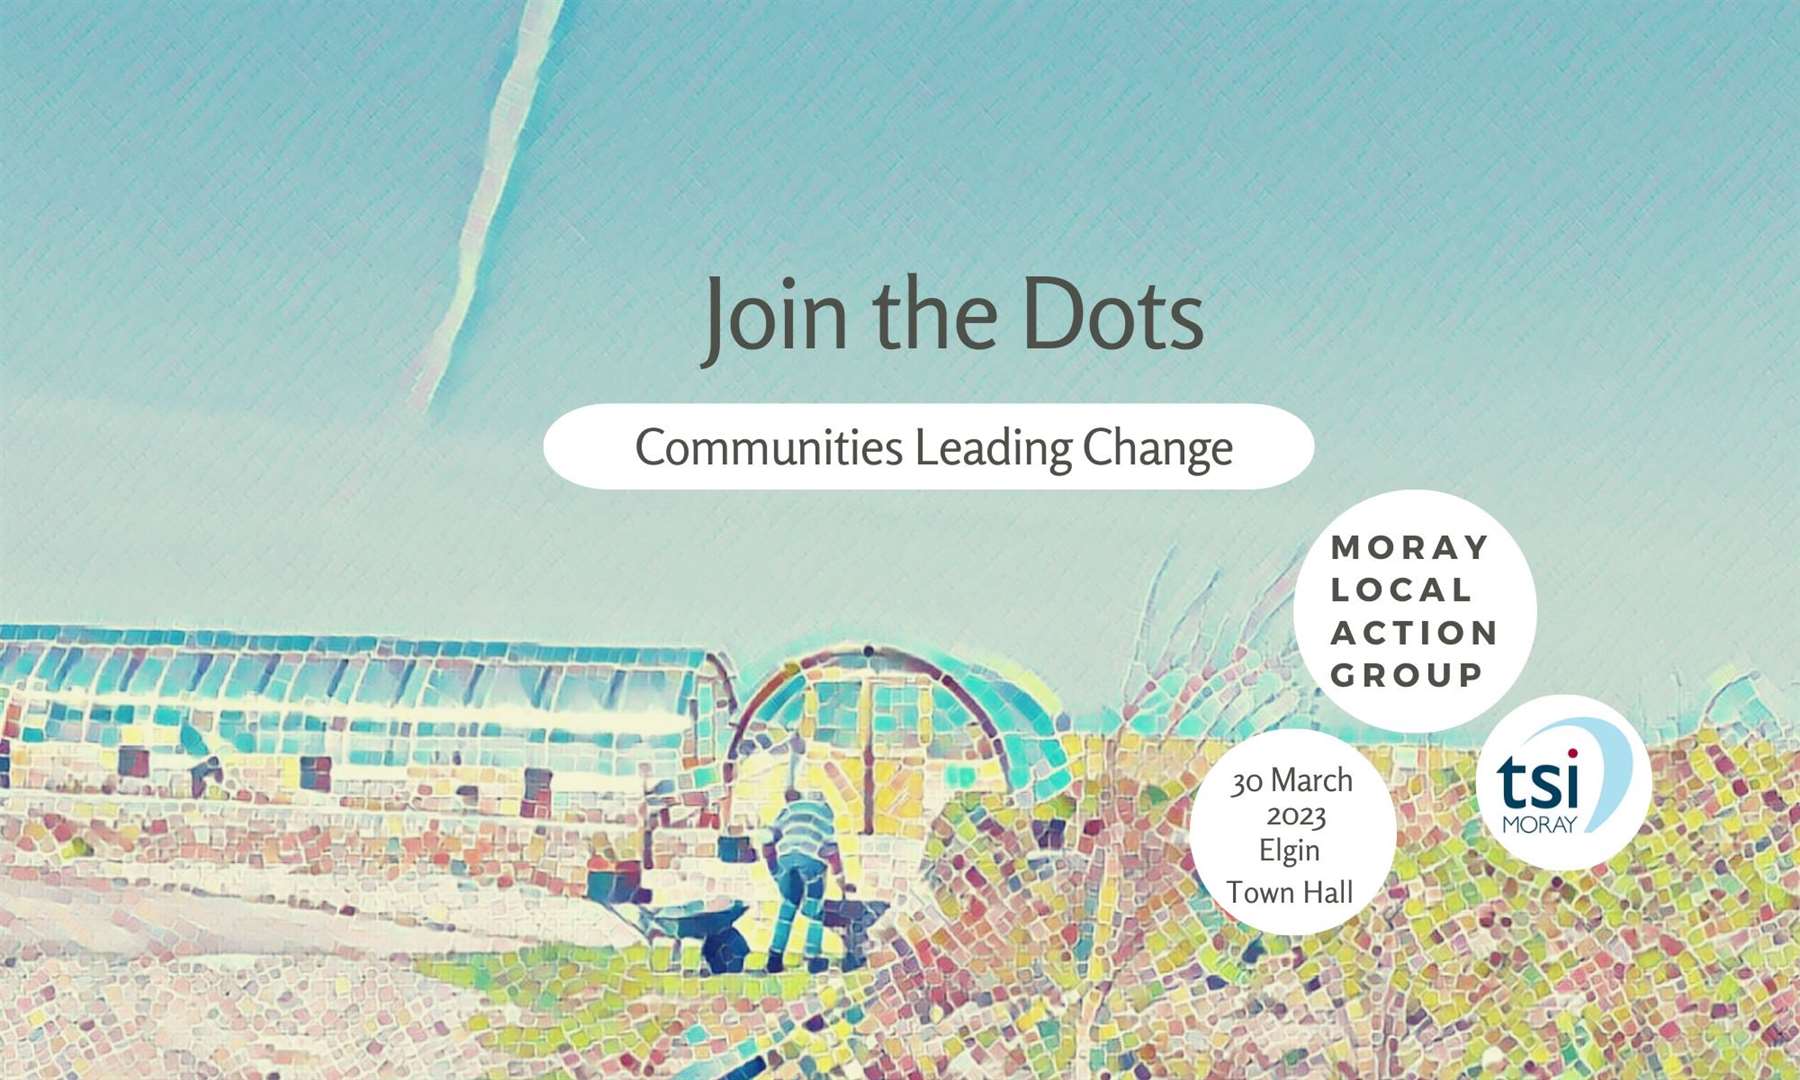 Communities driving change is a theme 